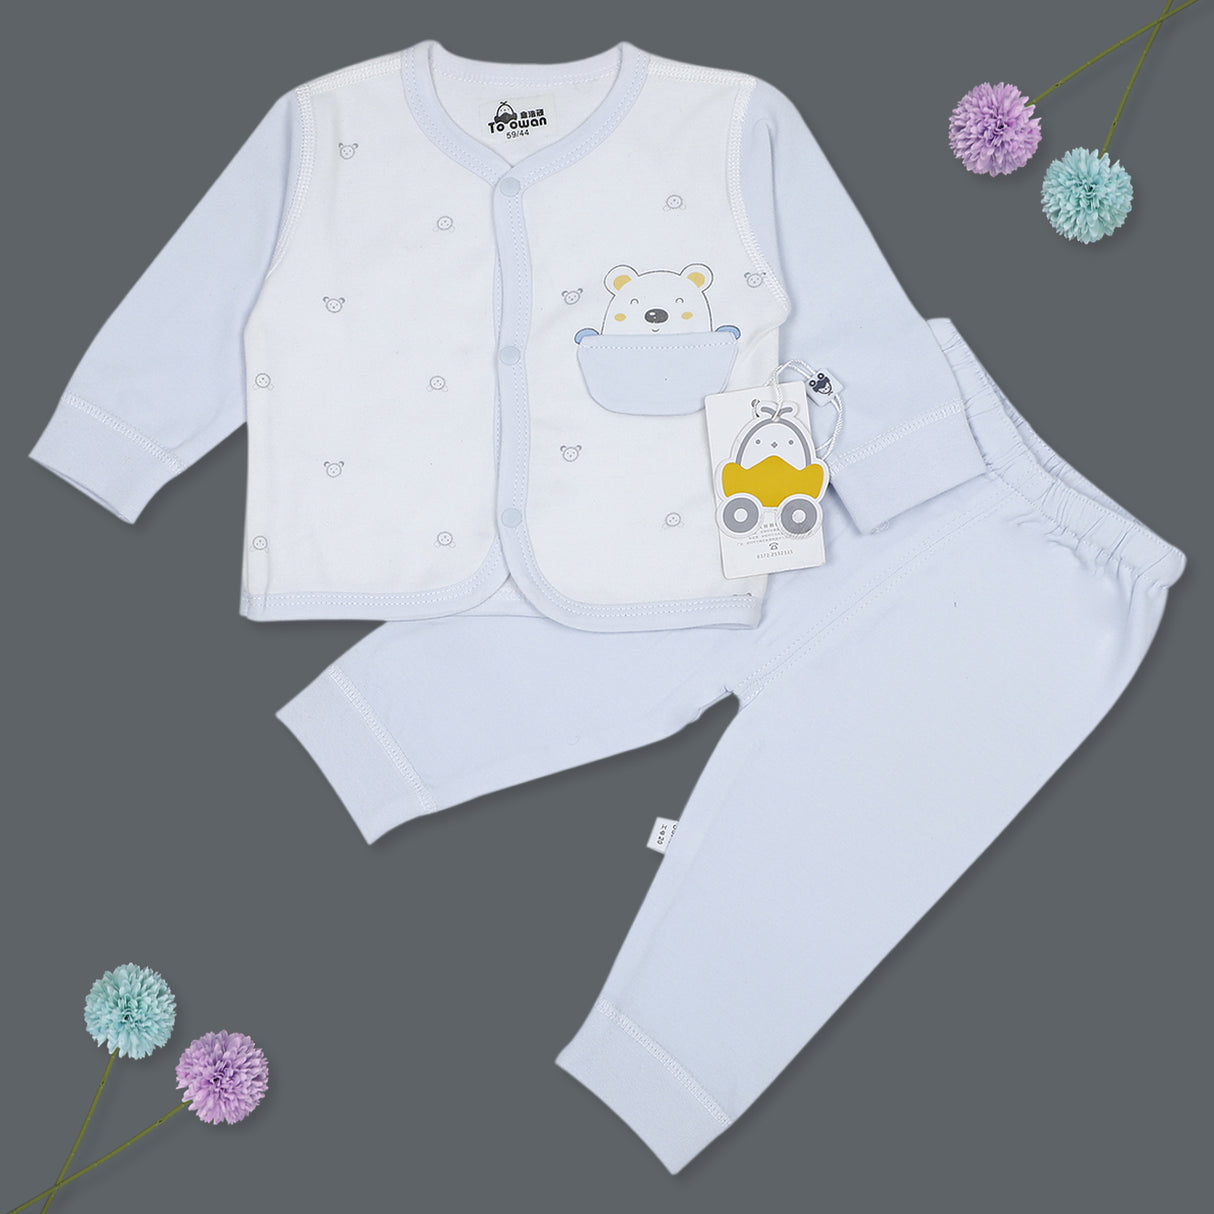 Bathing Teddy Full Sleeves Top And Pyjama Buttoned Night Suit